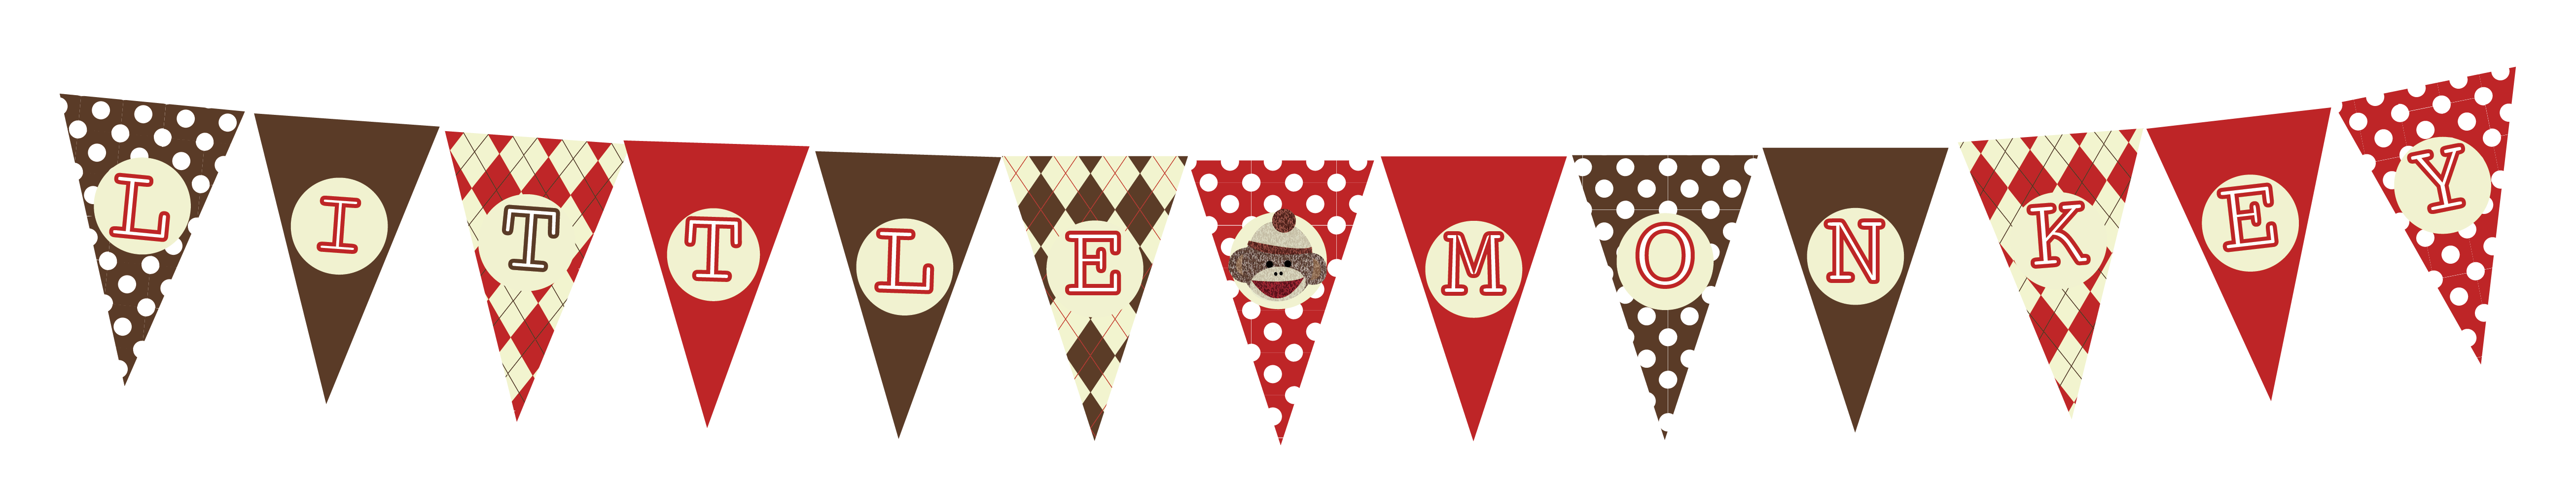 Free Sock Monkey Printable Decorations For Baby Shower Or Birthday - Free Printable Sock Monkey Pictures